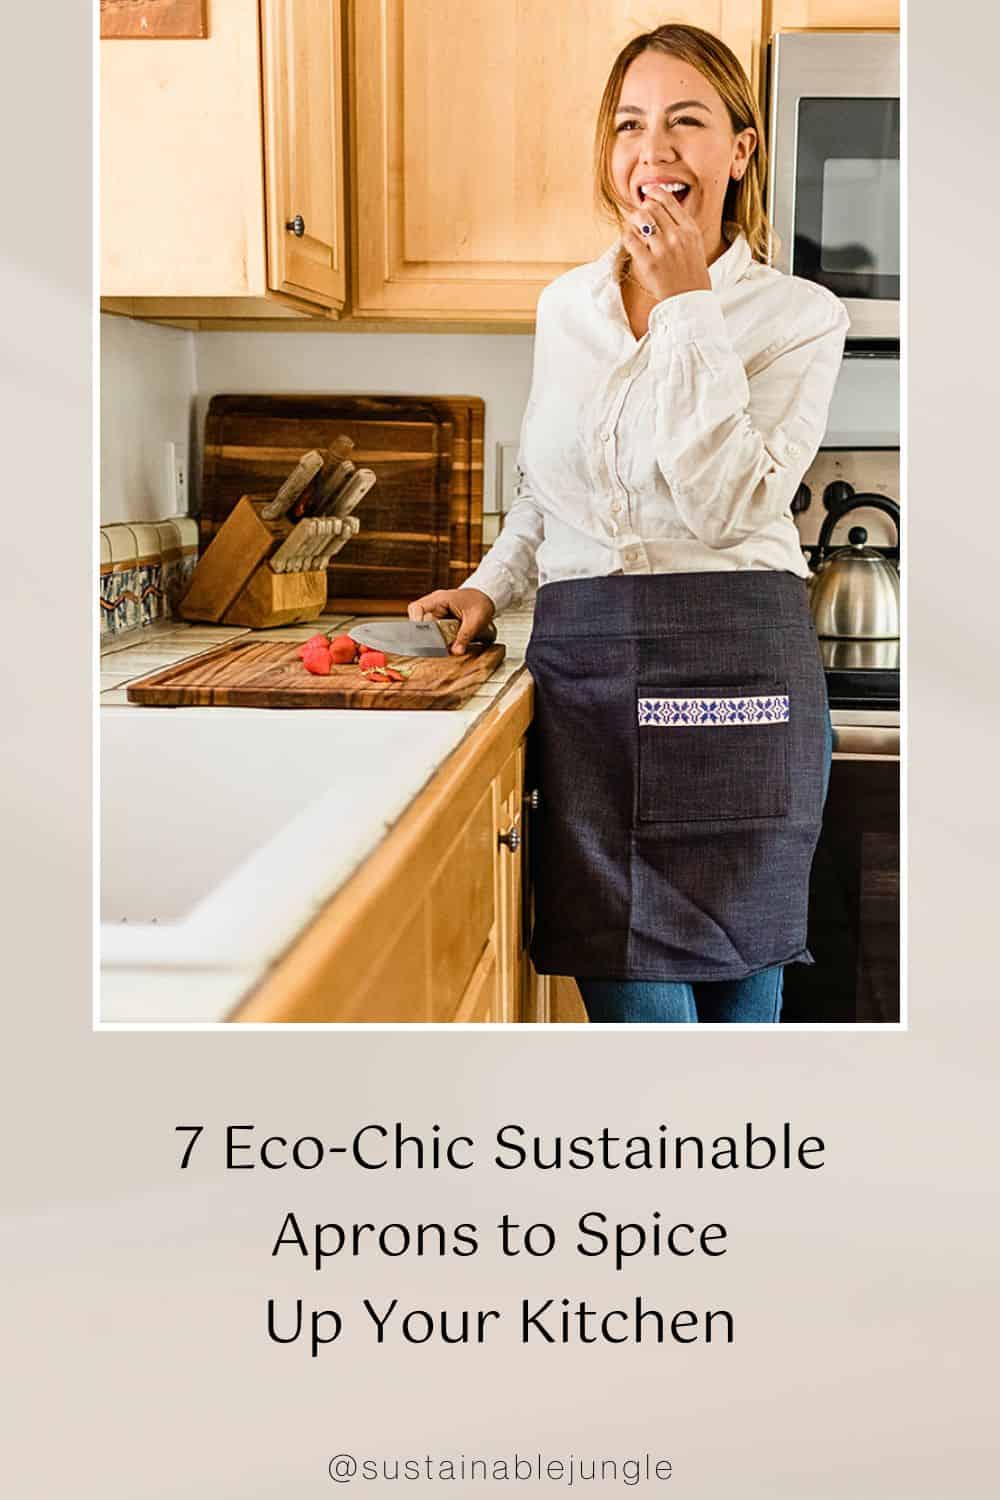 7 Eco-Chic Sustainable Aprons to Spice Up Your Kitchen Image by Darzah #sustainableaprons #ecofriendlyaprons #organicaprons #bestmaterialforaprons #sustainablecookingapronsforwomen #sustainablejungle